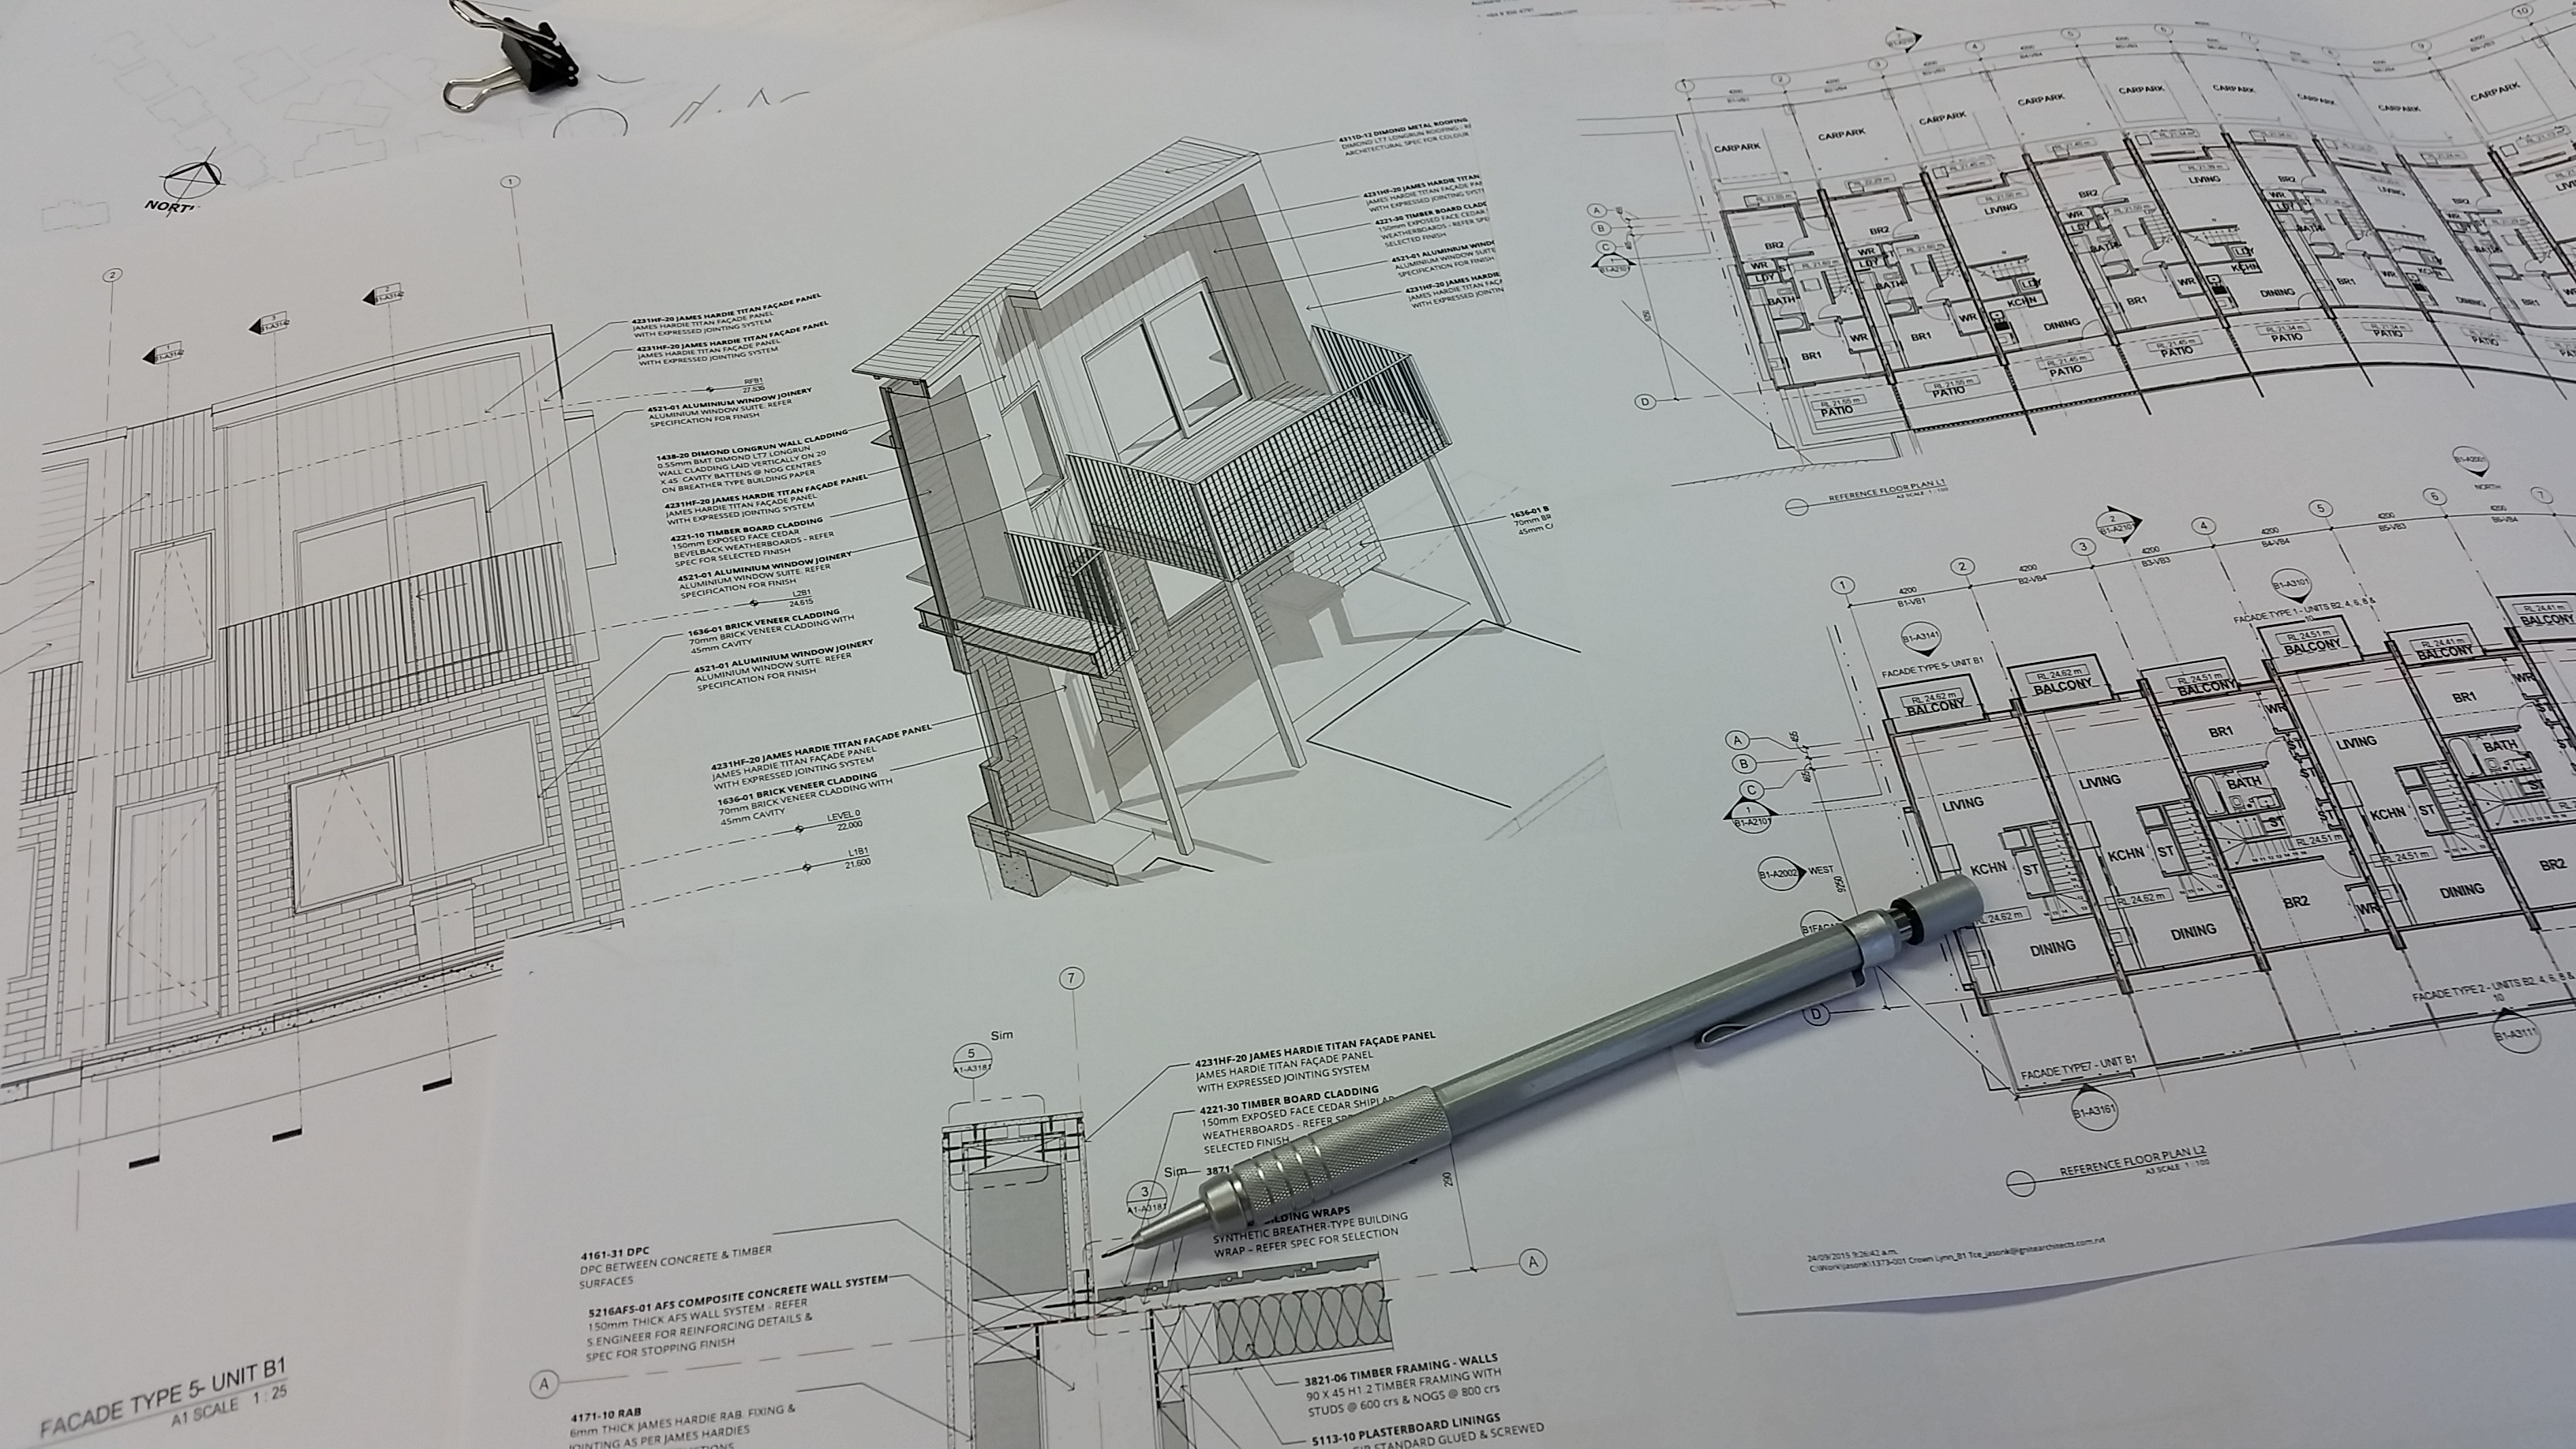 201: Becoming a Passive House Designer